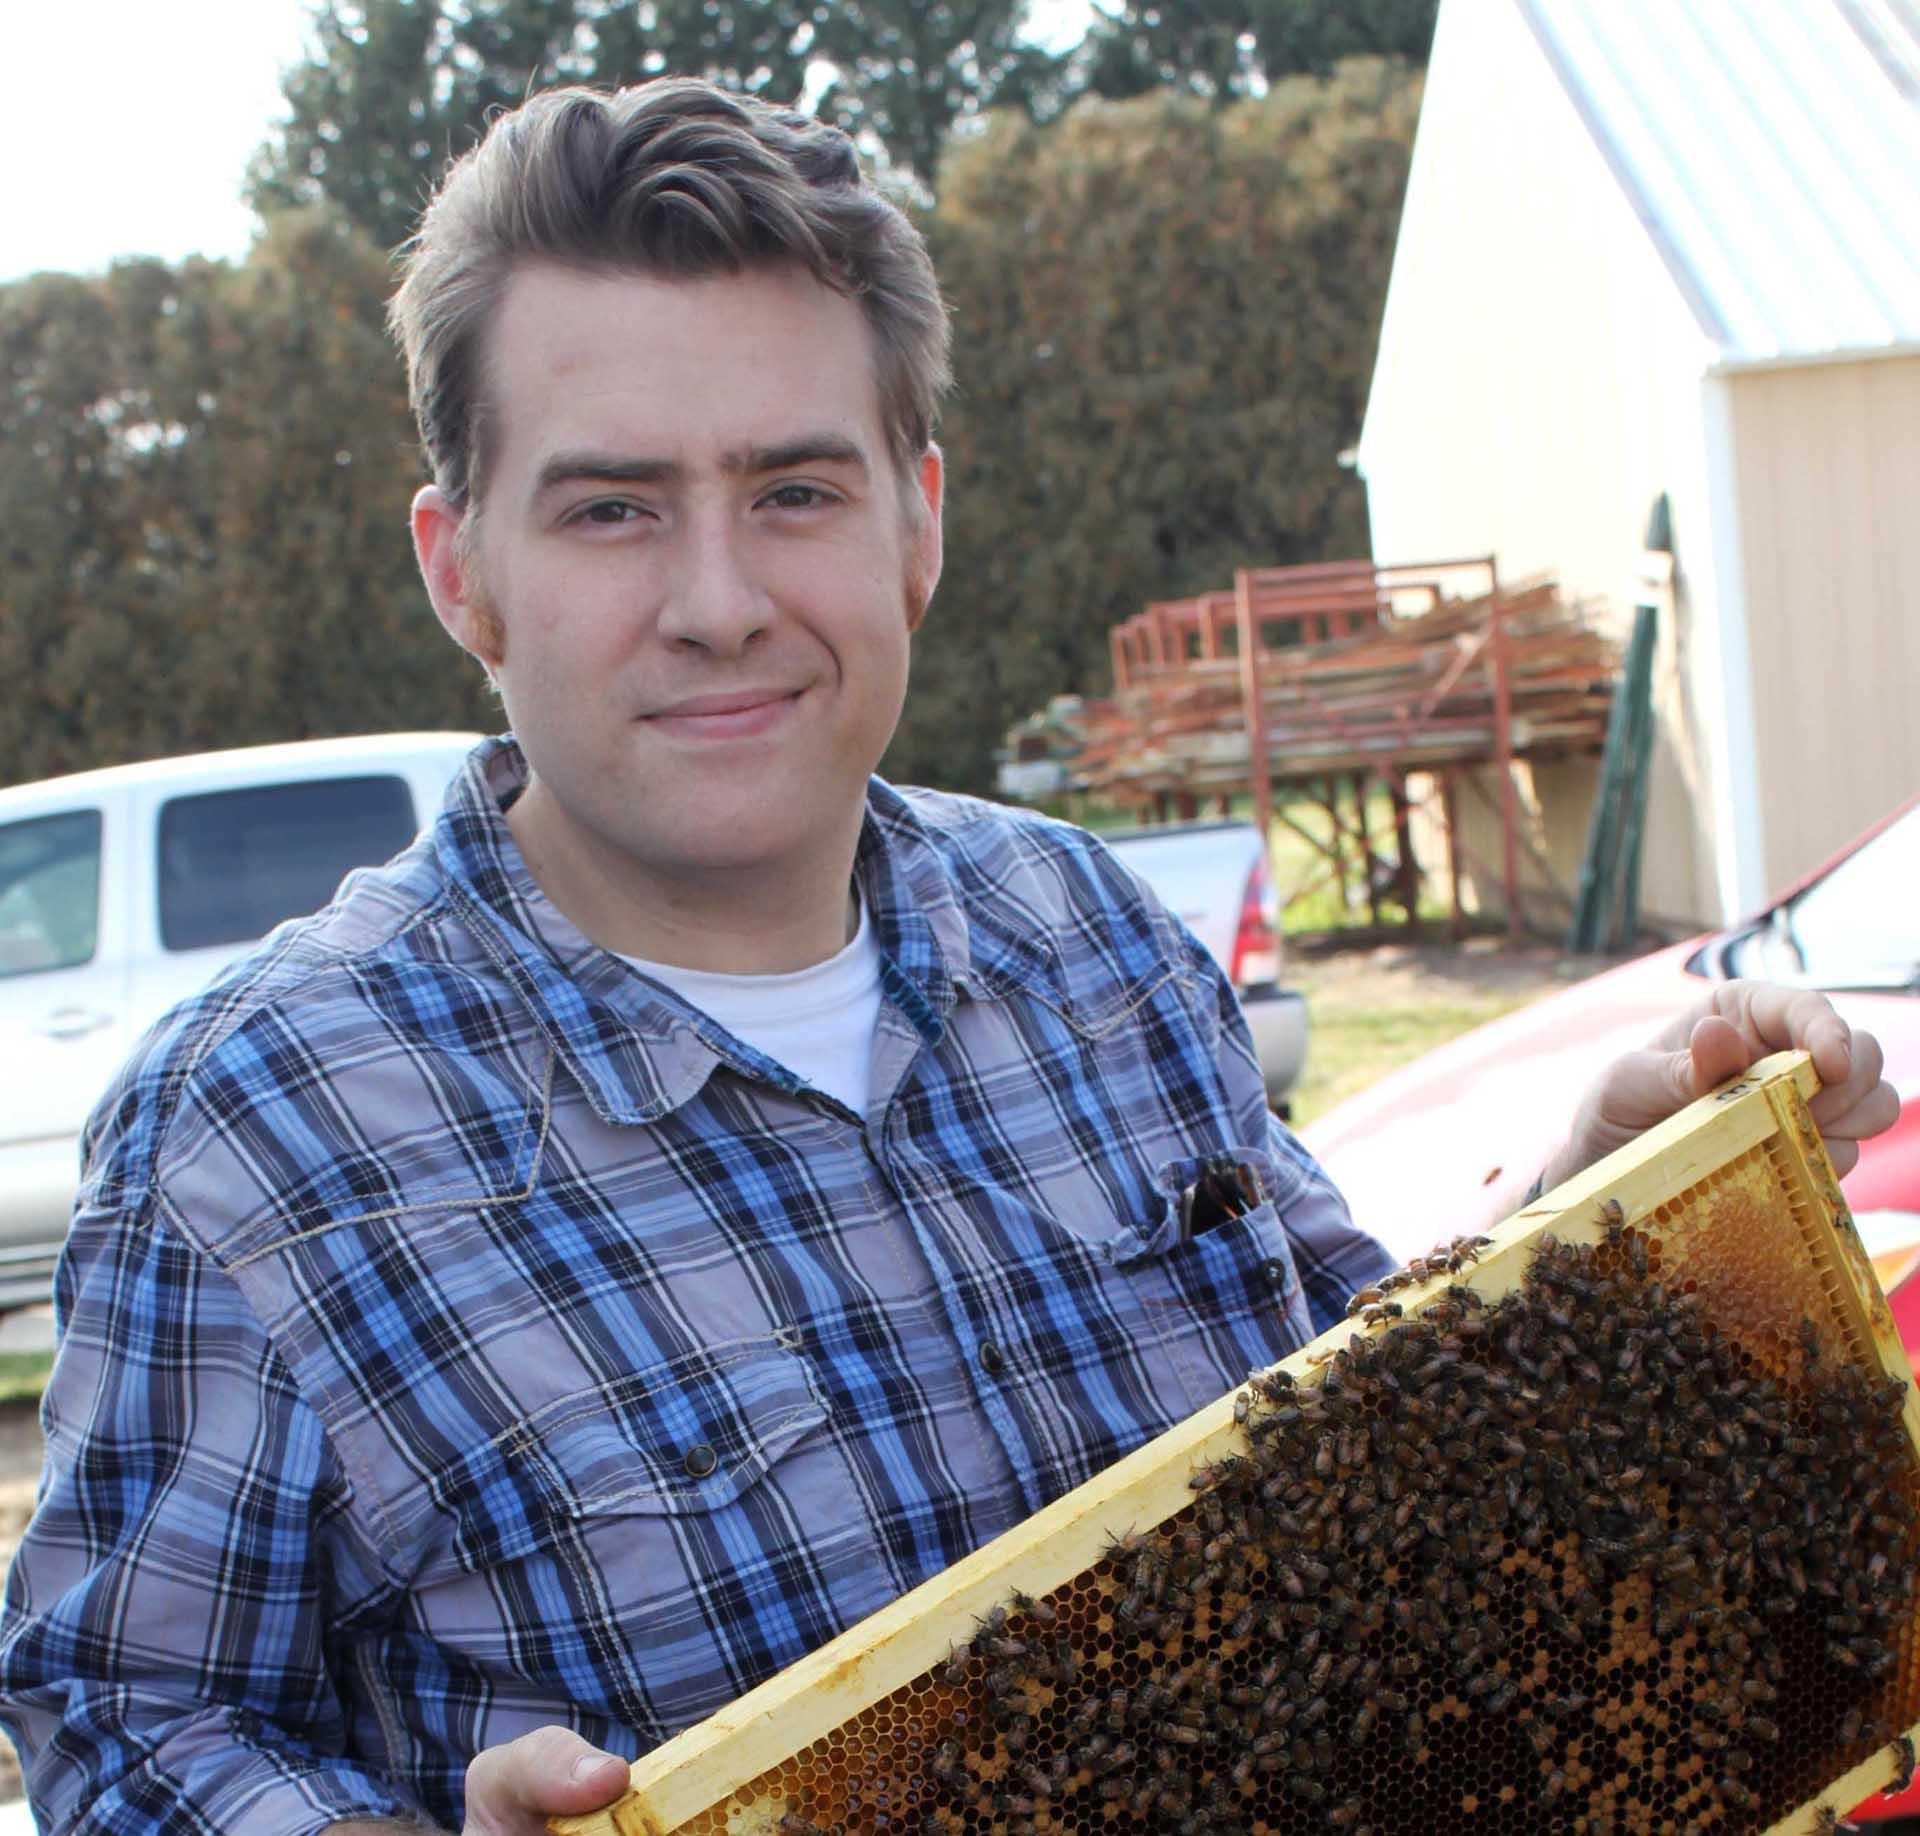 Iowa State University's Adam Dolezal says new research shows that people have contributed to honeybee disease spread. (Photo: Courtesy Adam Dolezal)